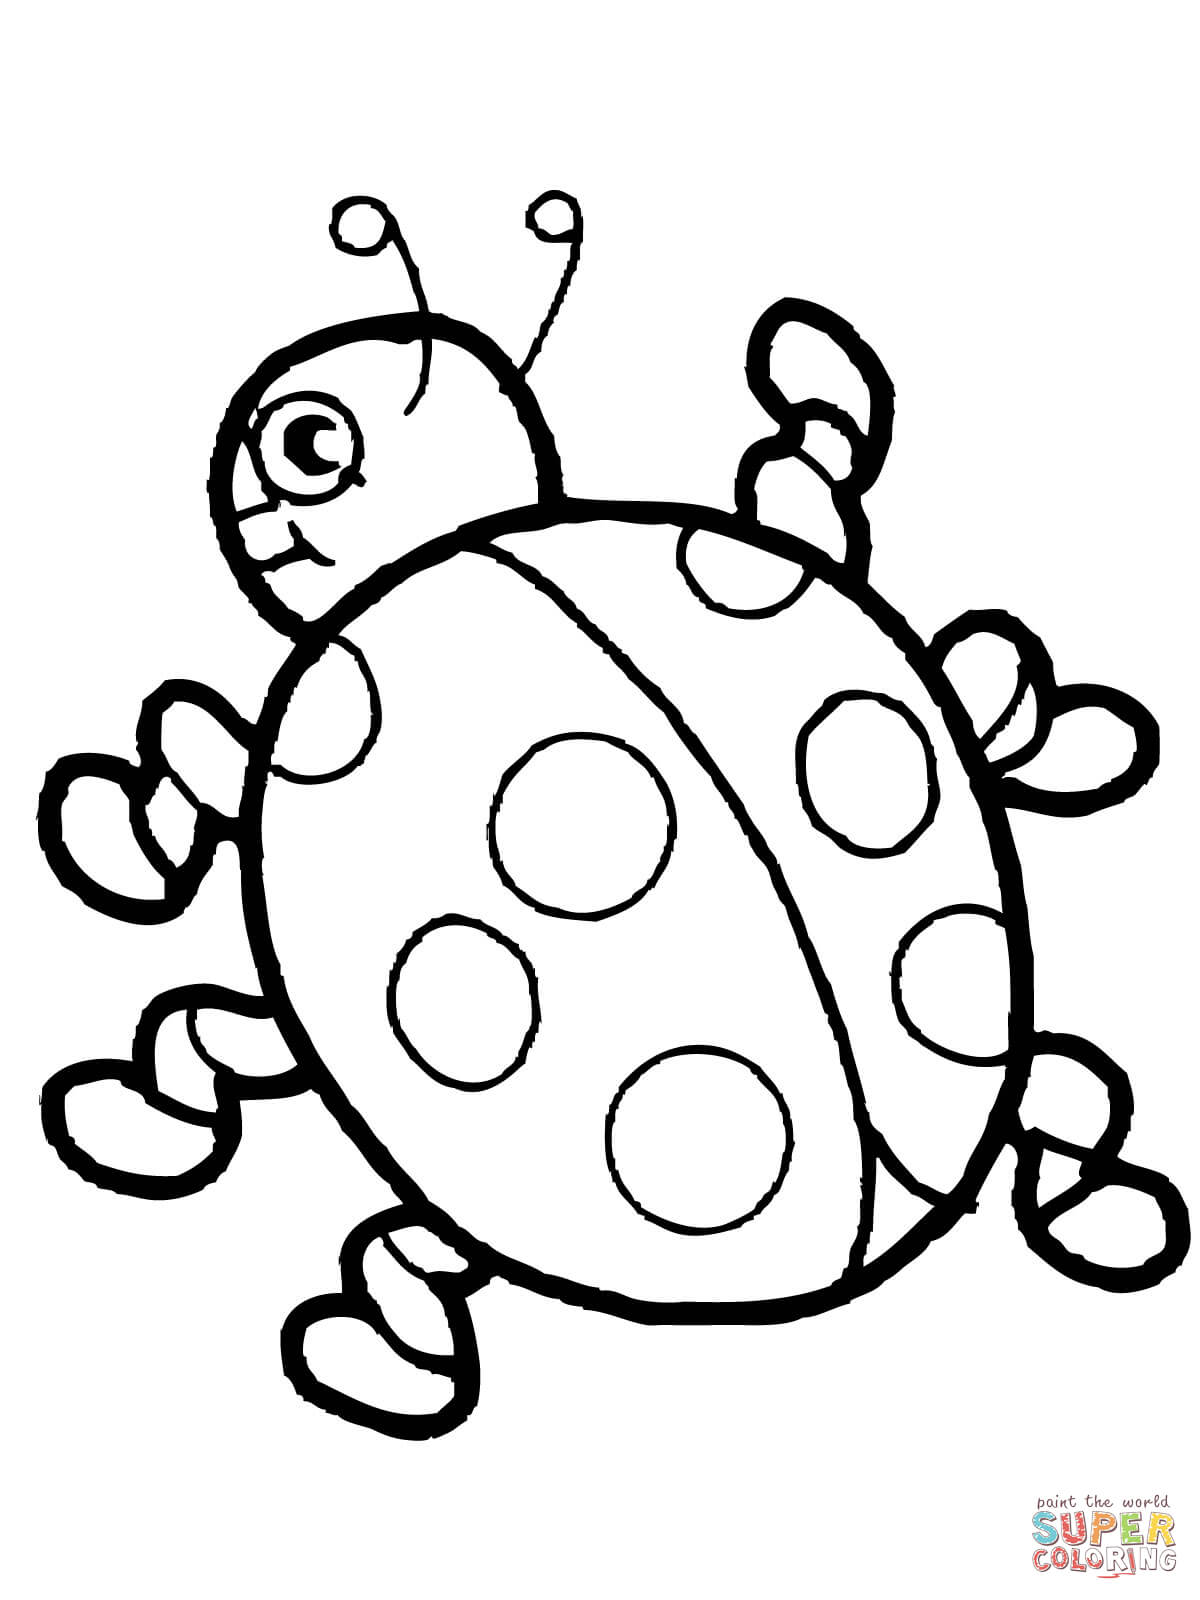 Cute Ladybug coloring page | Free Printable Coloring Pages